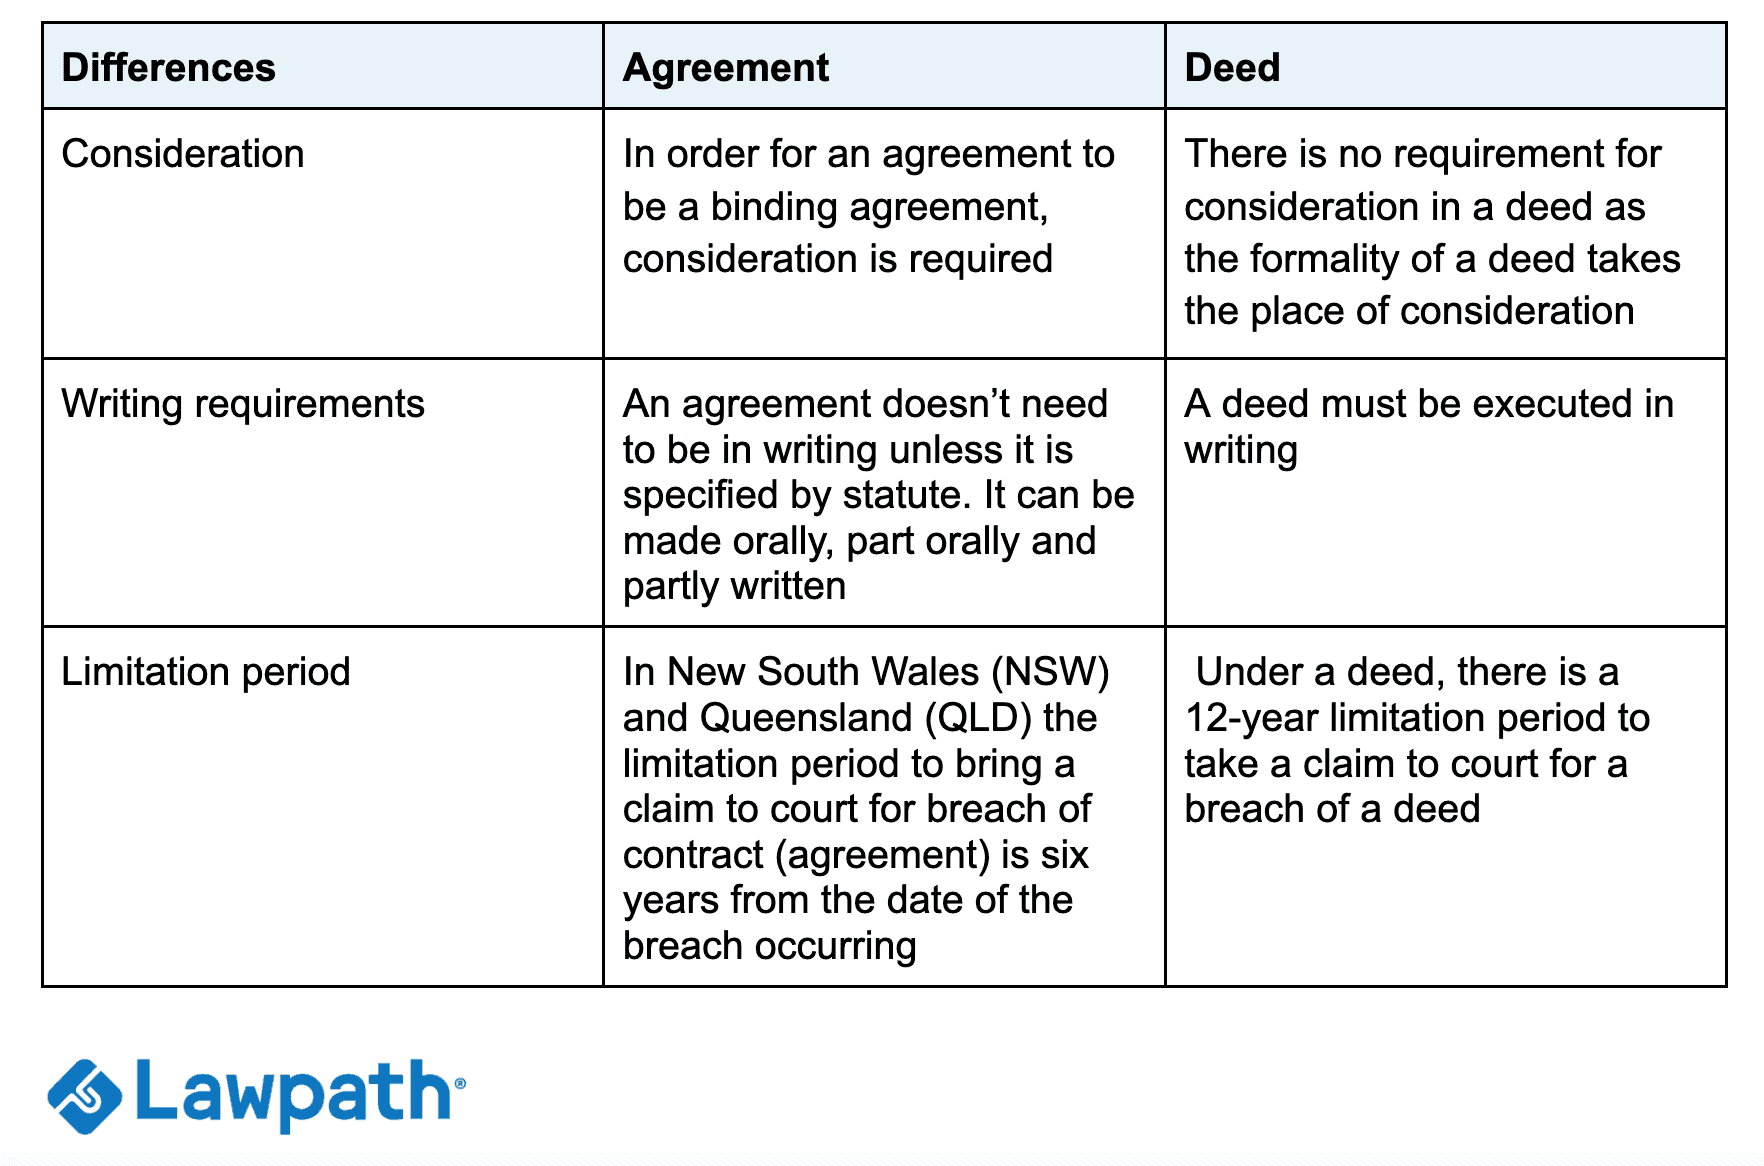 Difference between deeds and agreements